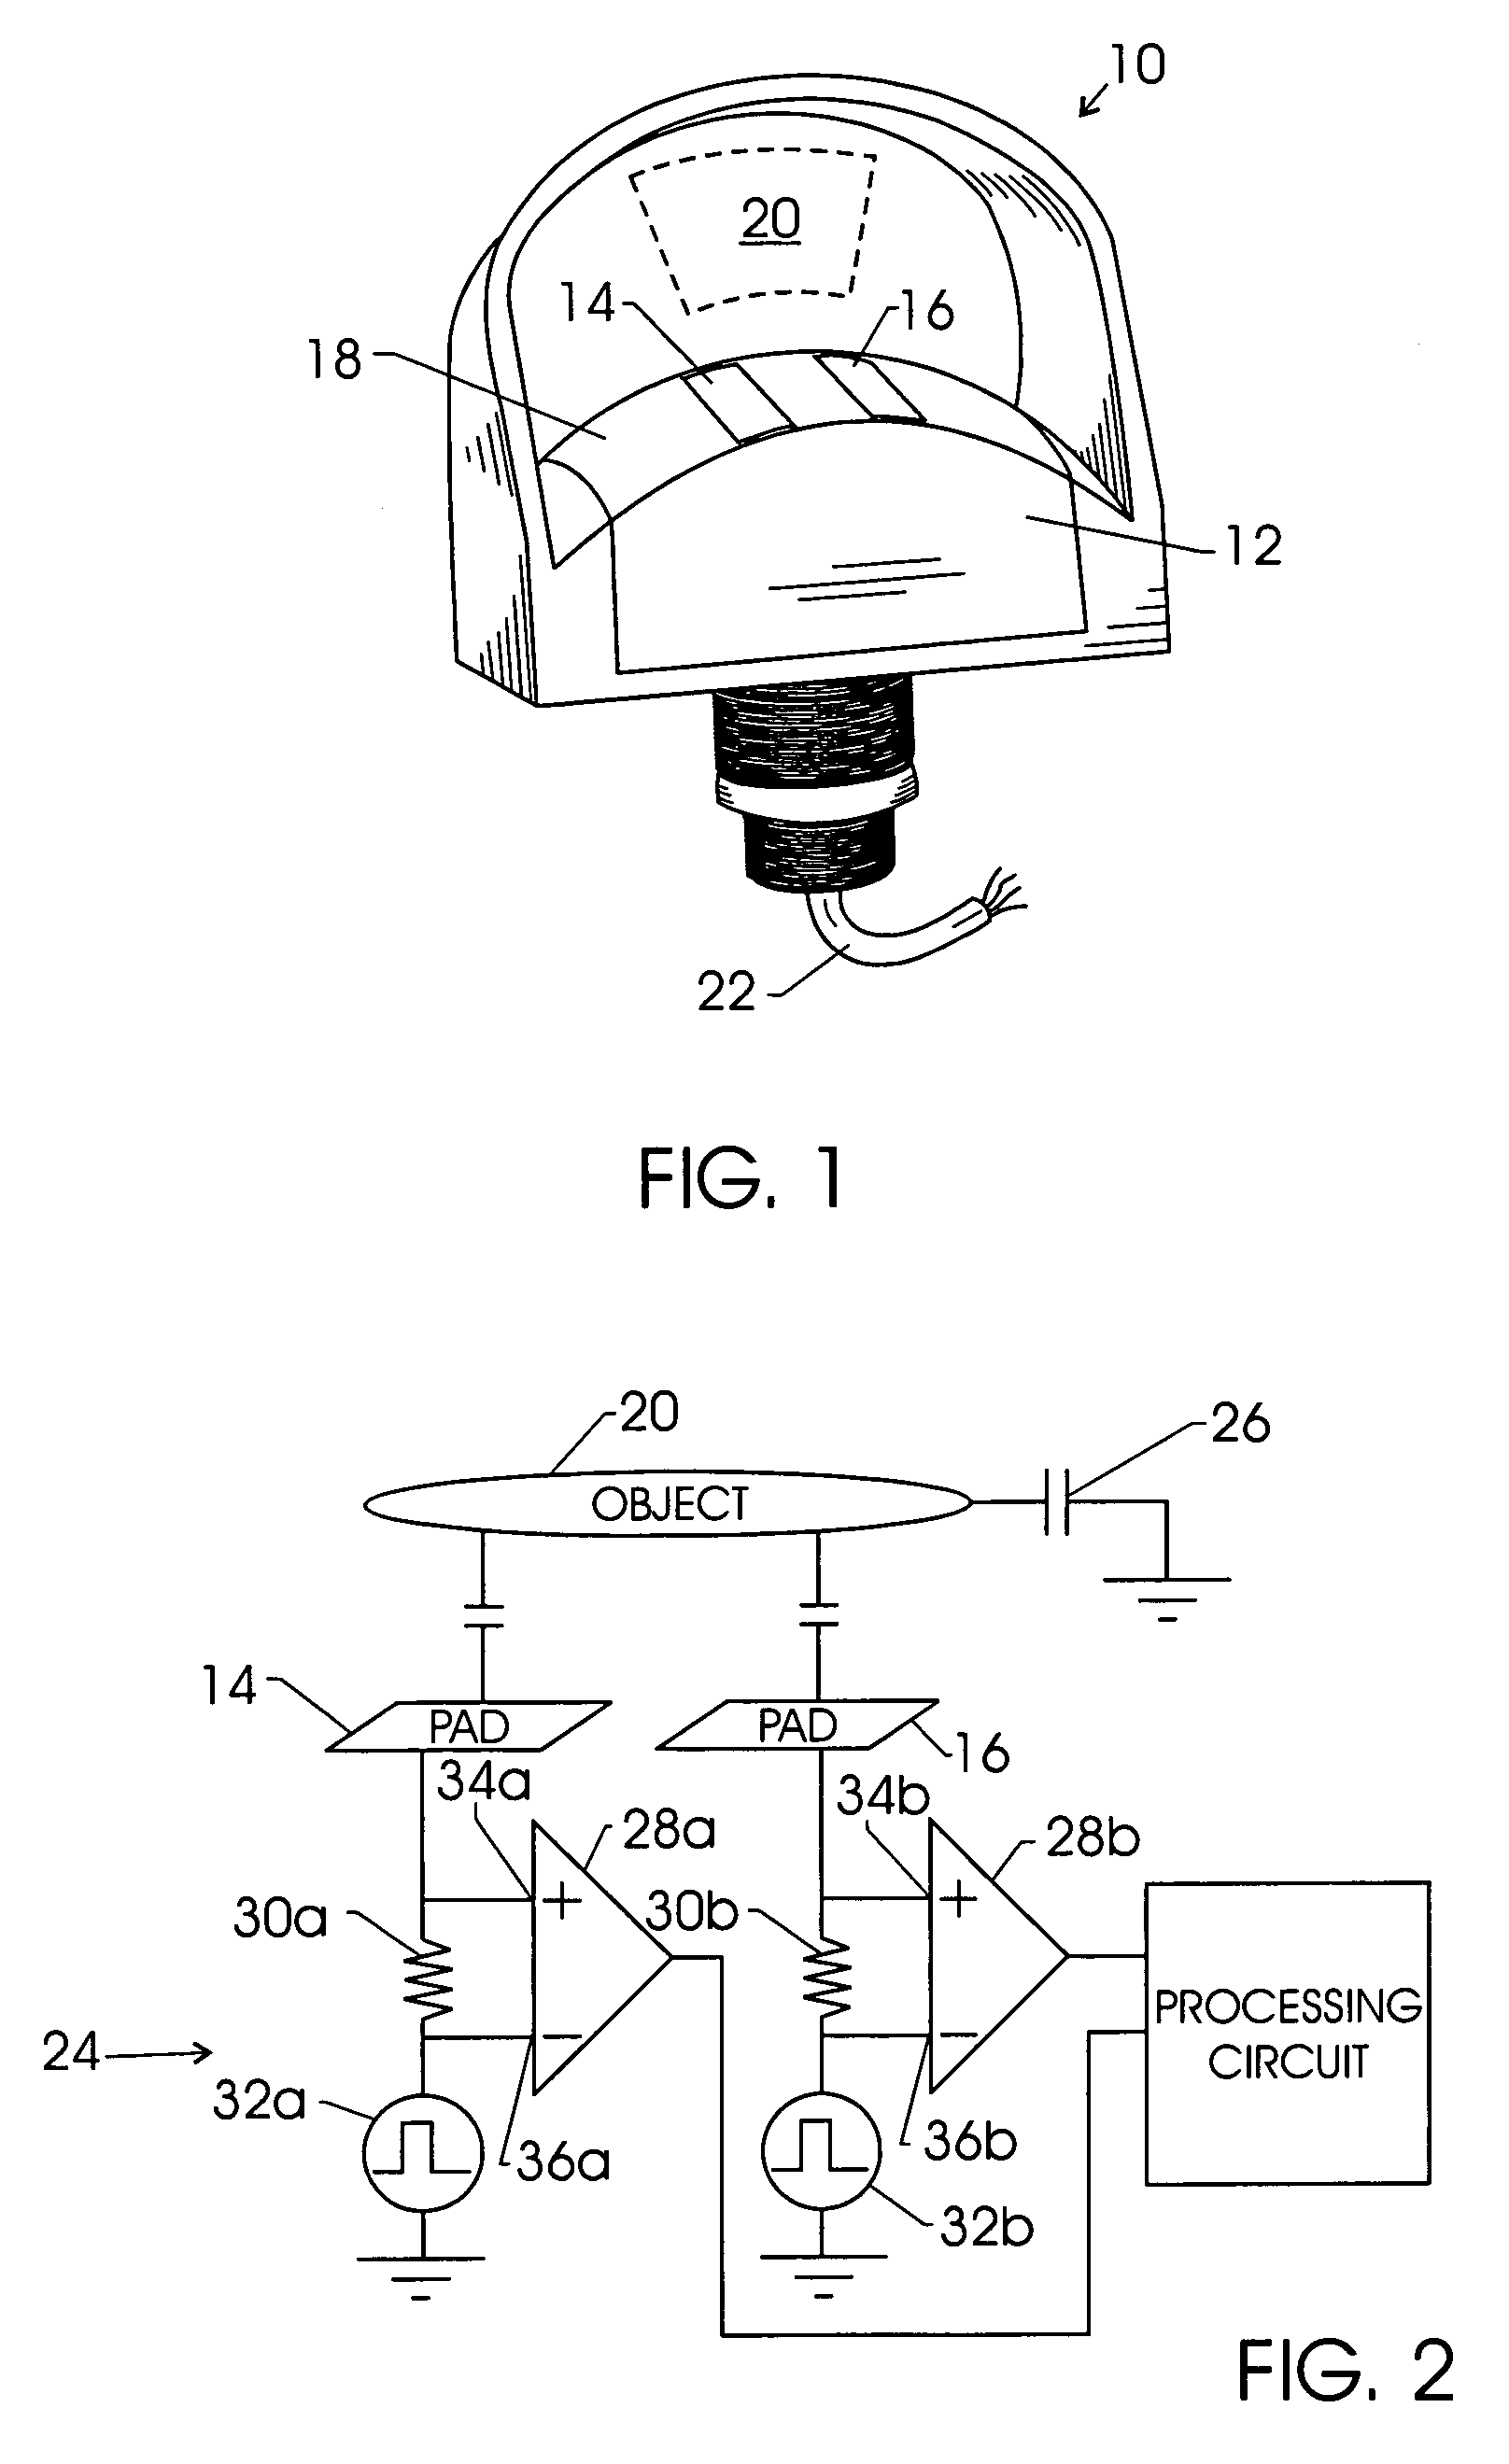 Method and apparatus for providing a switching signal in the presence of noise